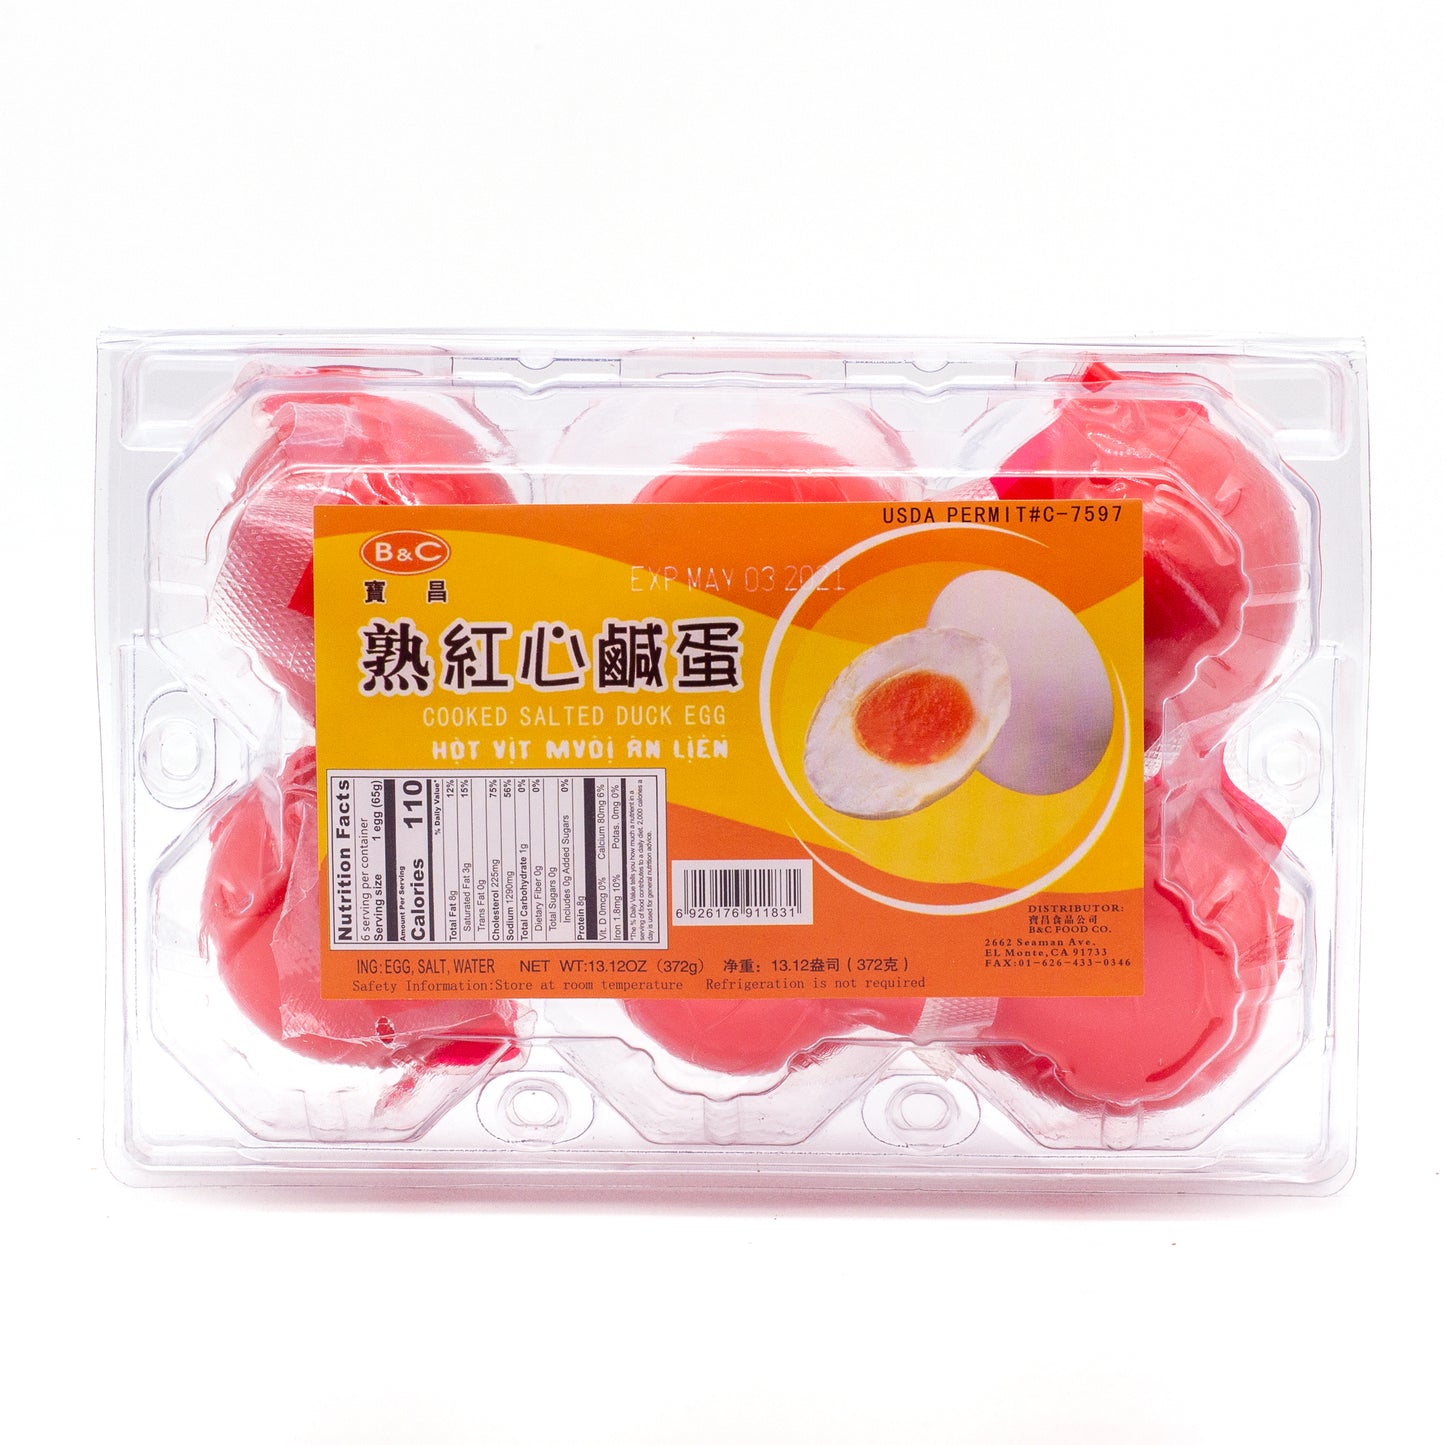 Whole Cooked Salted Duck Eggs (红心咸蛋13.12 OZ)